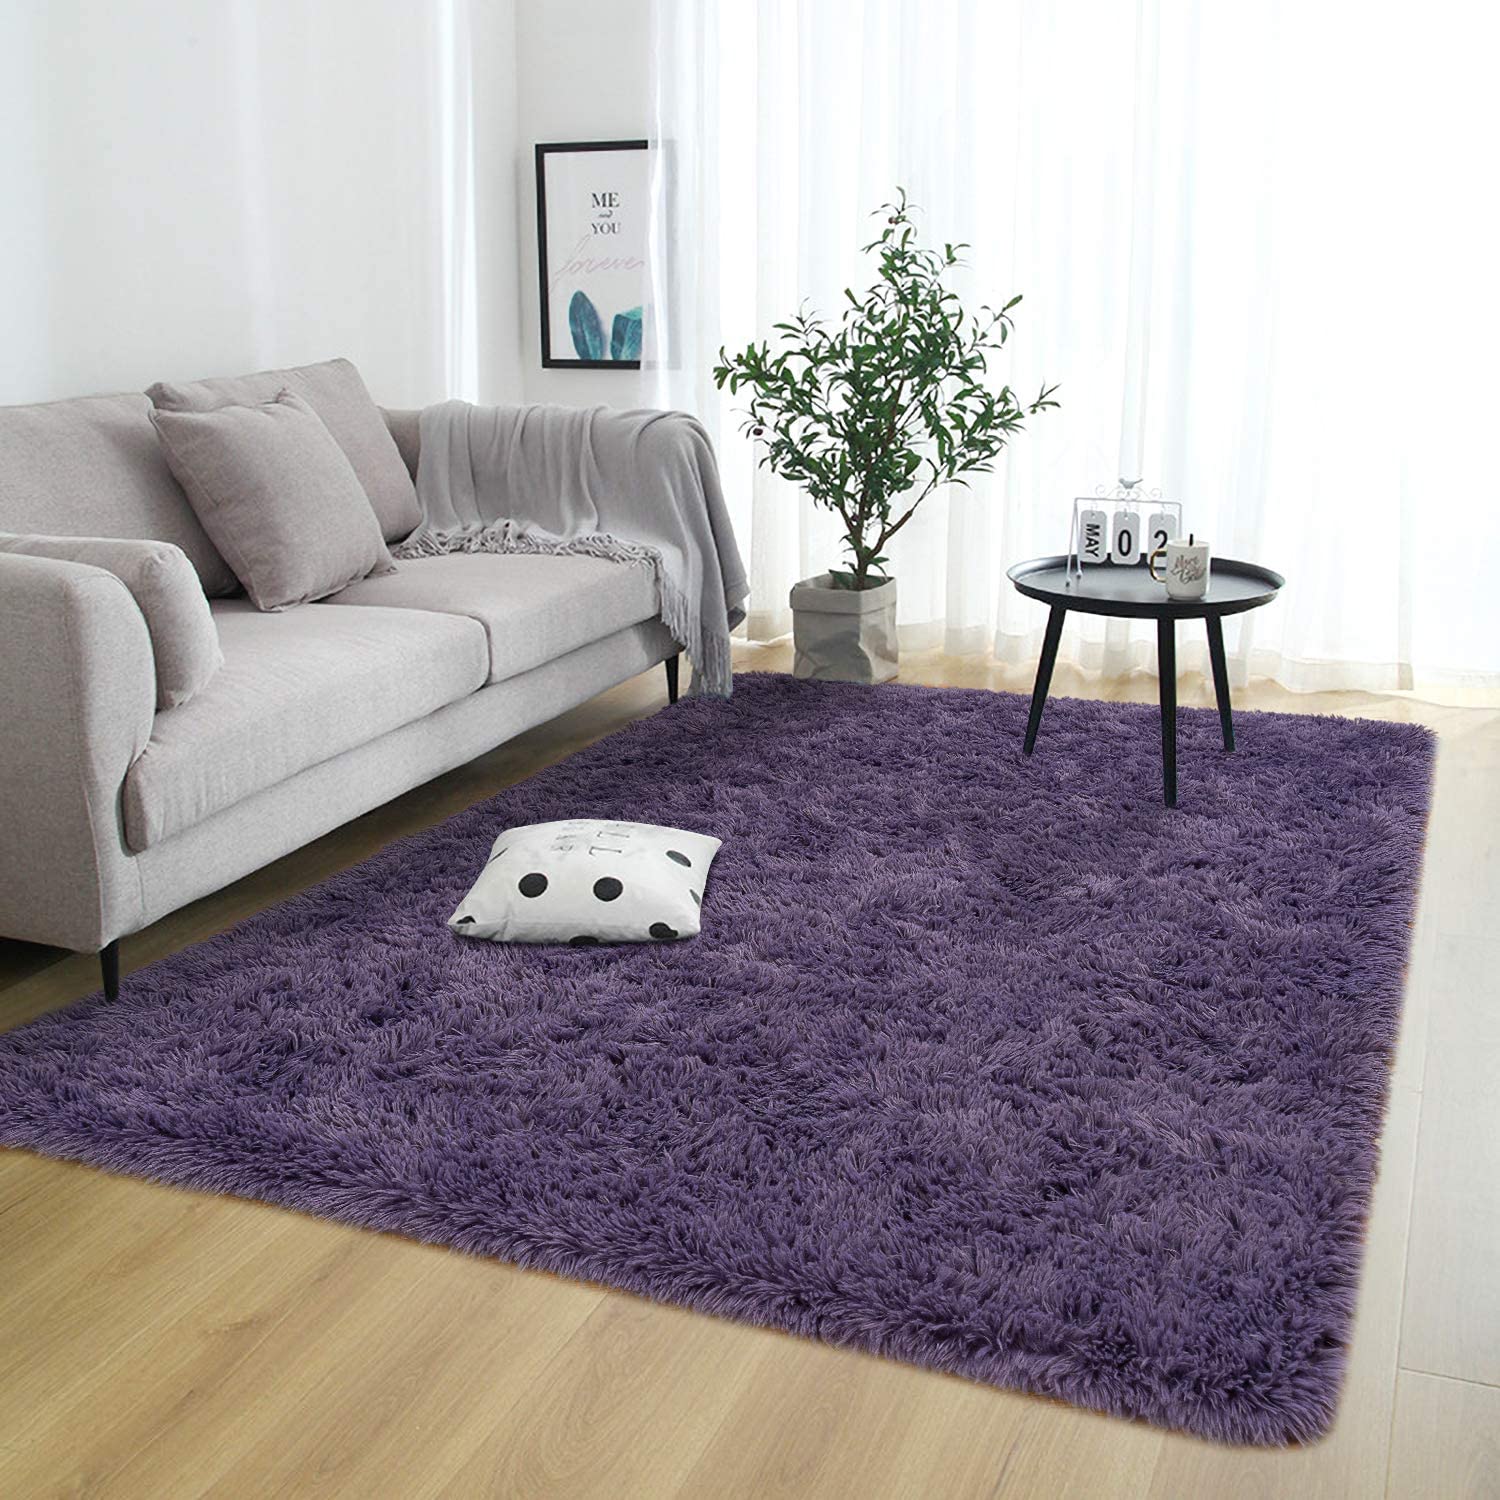 Details about   Rostyle Super Soft Fluffy Area Rugs for Bedroom Living Room Shaggy Floor Carpets 